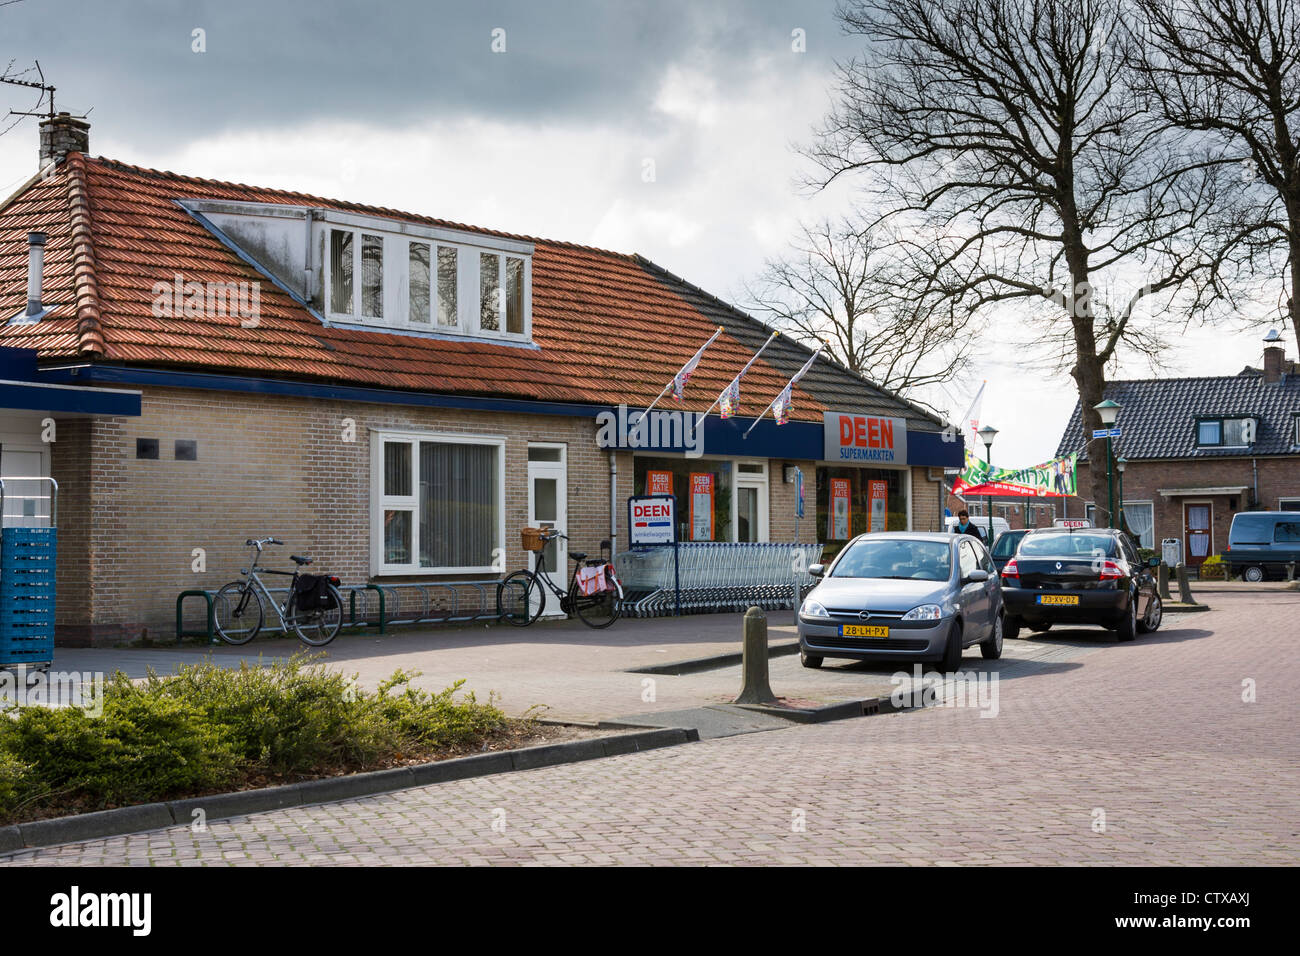 Deen Supermarkt in The village of Akersloot in North Holland, The Netherlands. Stock Photo